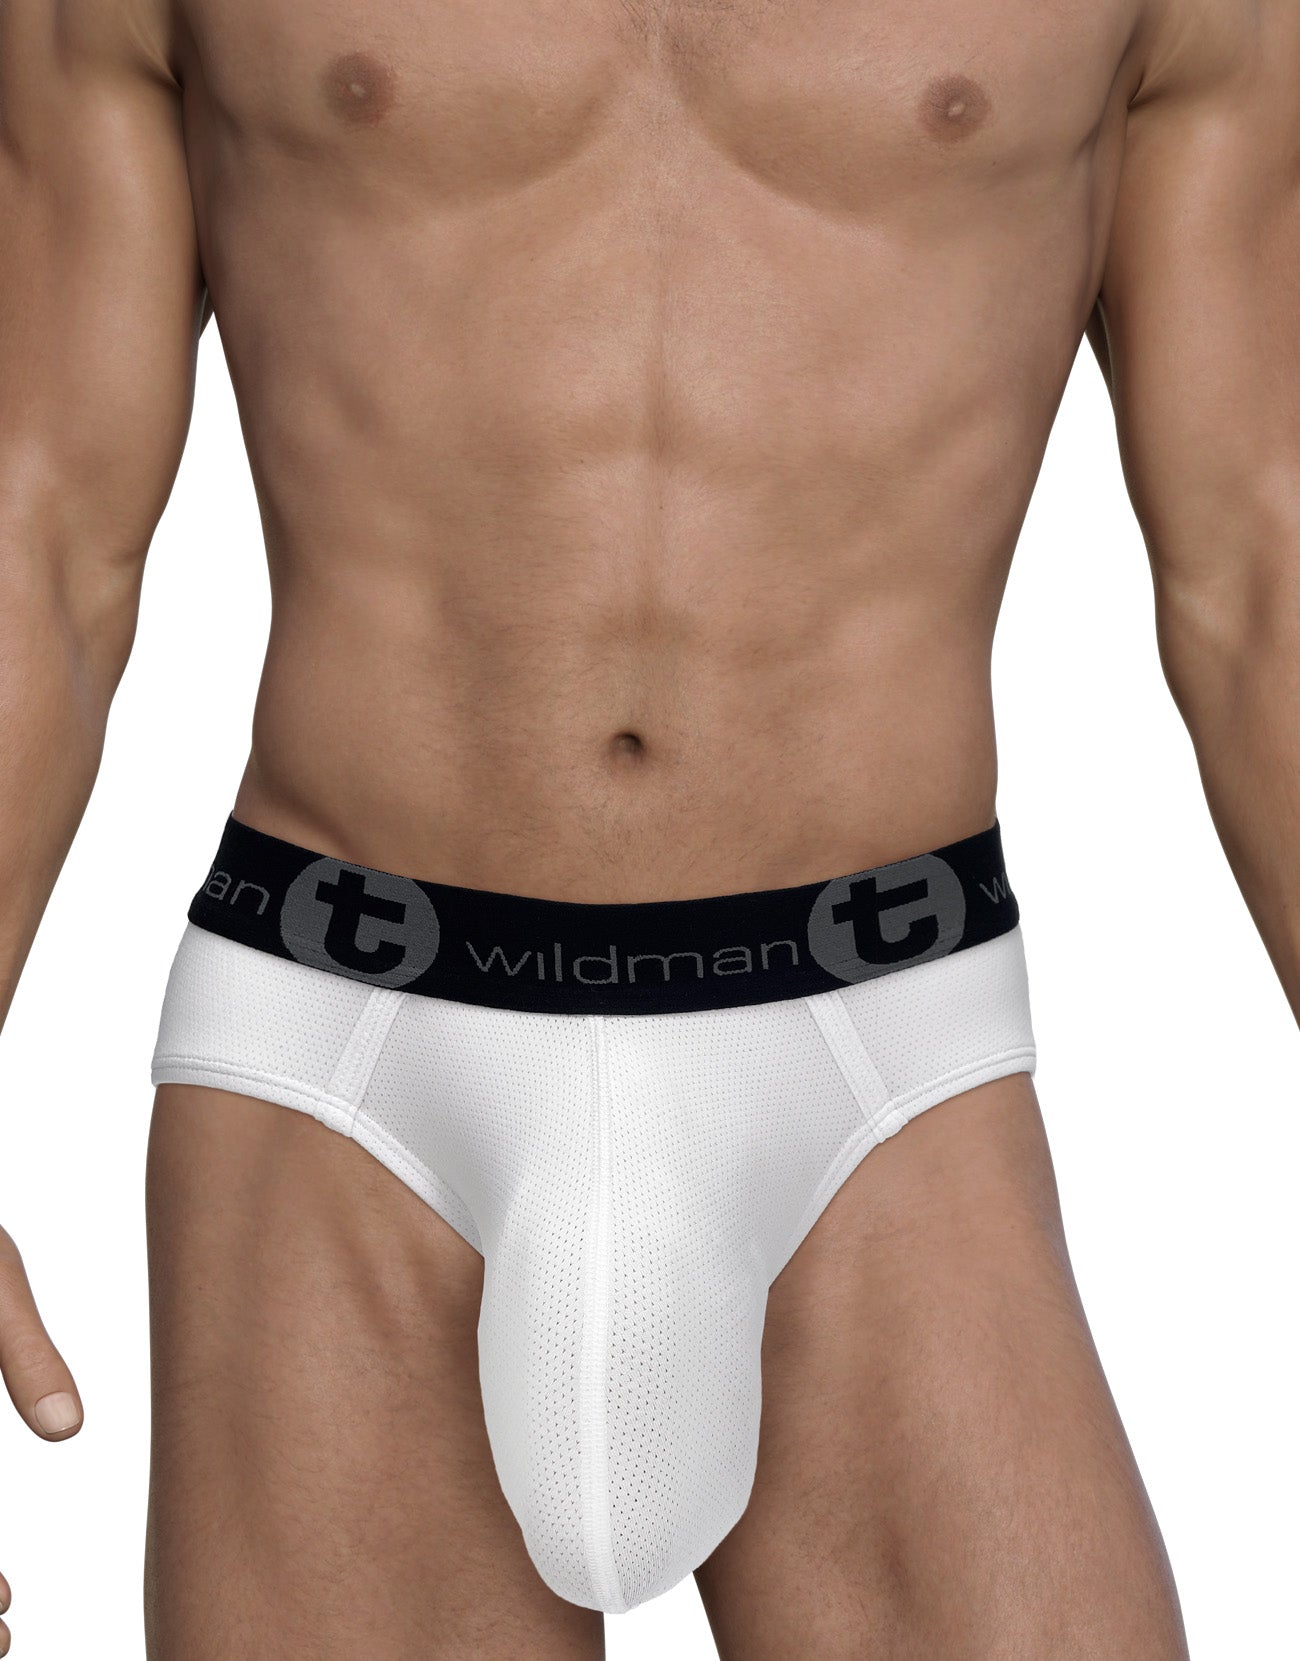 WildmanT Mesh Monster Cock Brief White - DealByEthan.gay